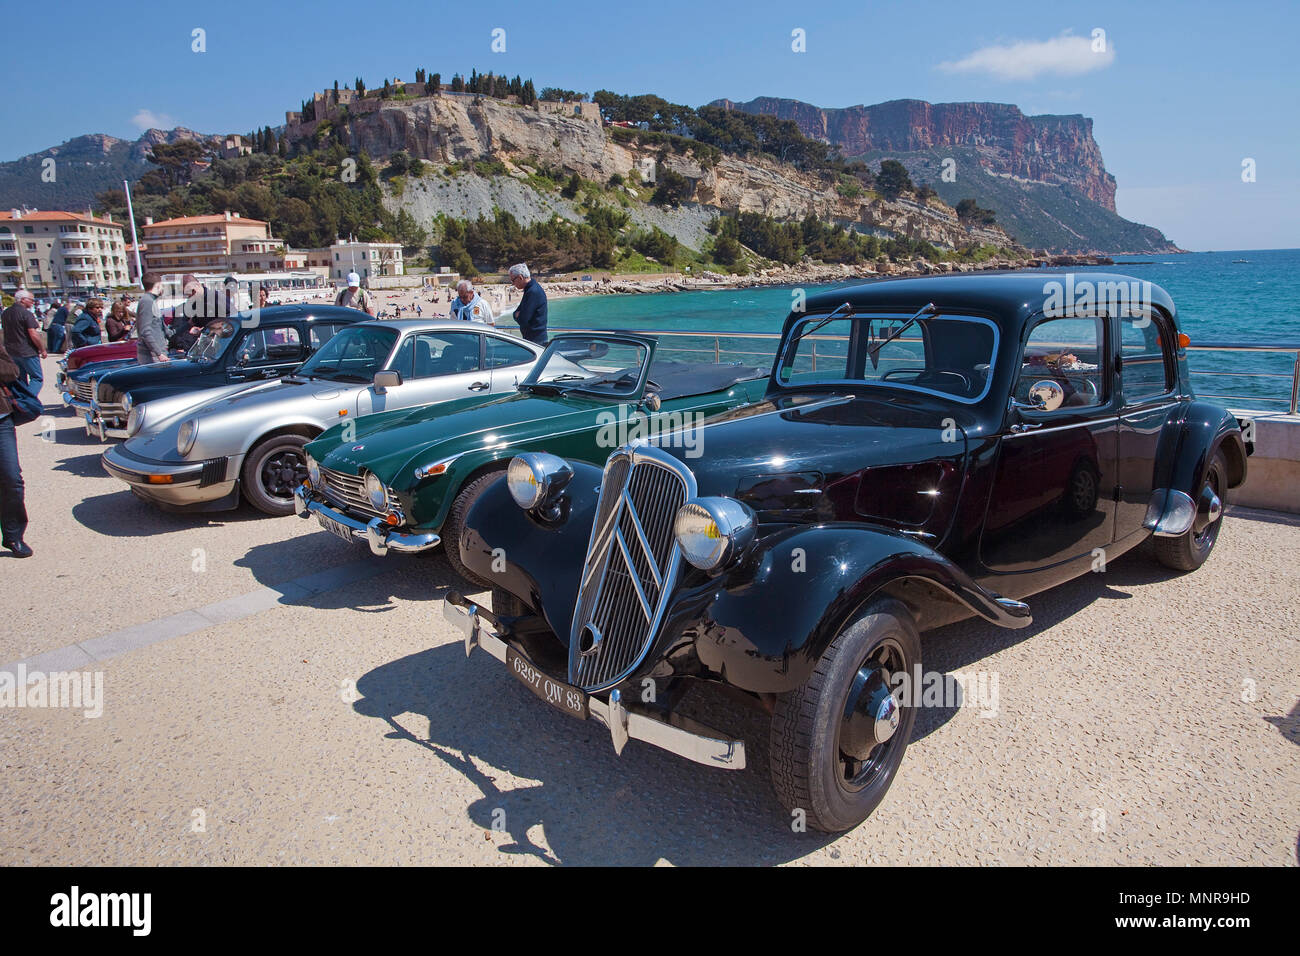 Classic cars at harbour of Cassis, Bouches-du-Rhone, Provence-Alpes-Côte d’Azur, South France, France, Europe Stock Photo